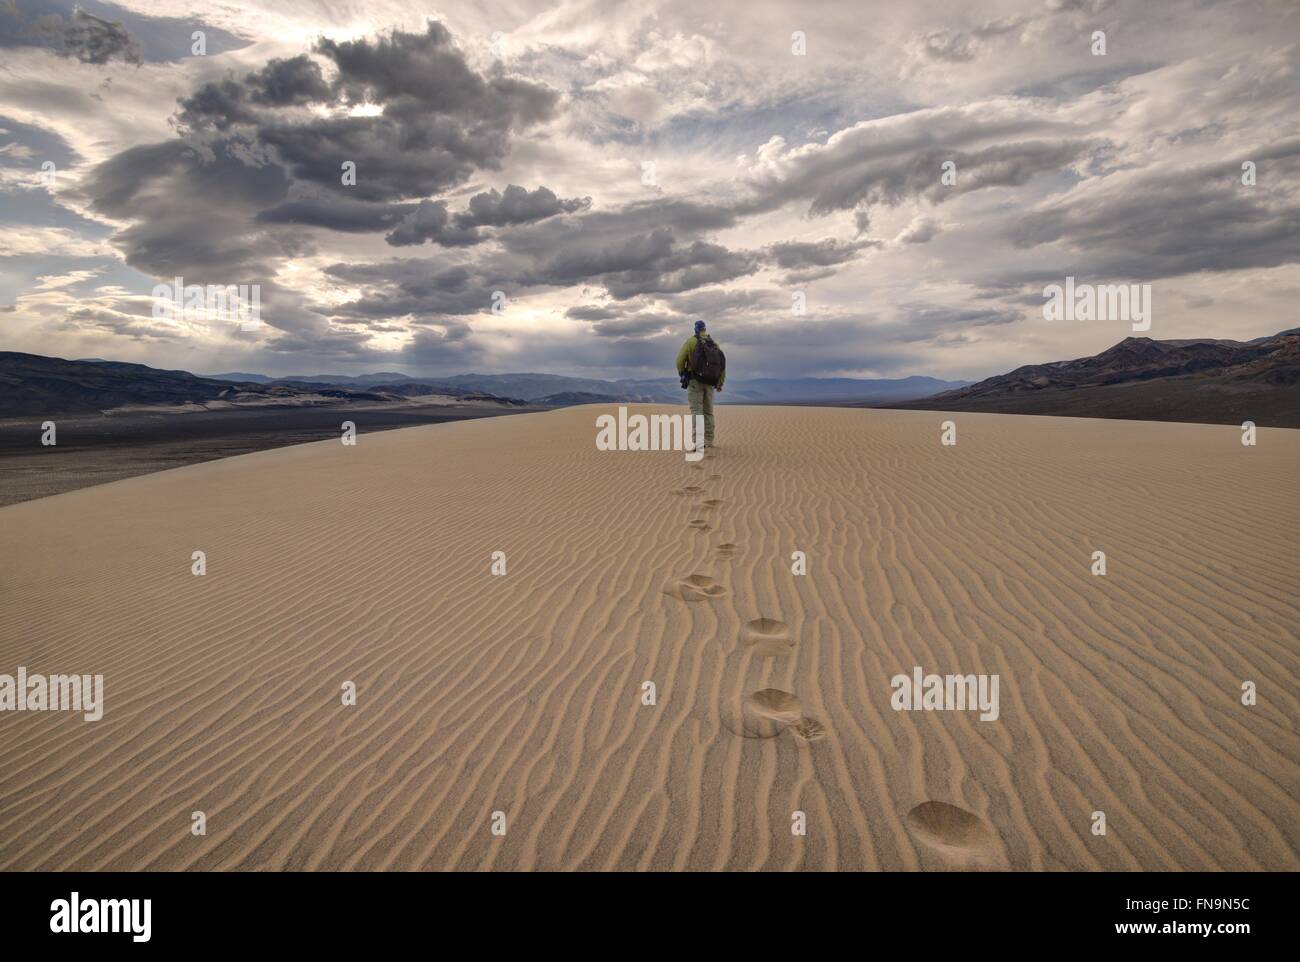 Man walking in the eureka dunes, death valley national park, California, United States Stock Photo